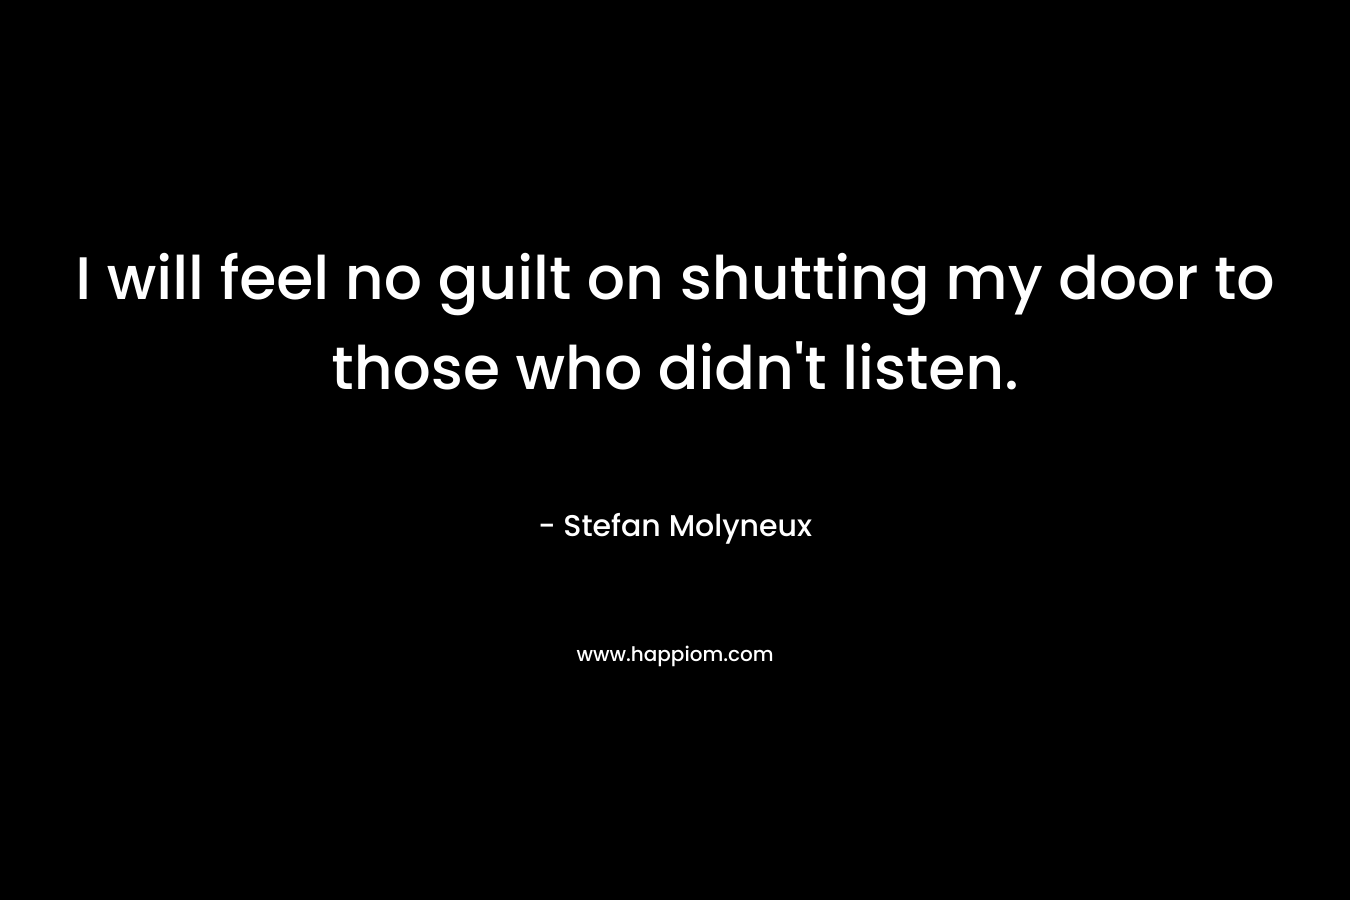 I will feel no guilt on shutting my door to those who didn't listen.